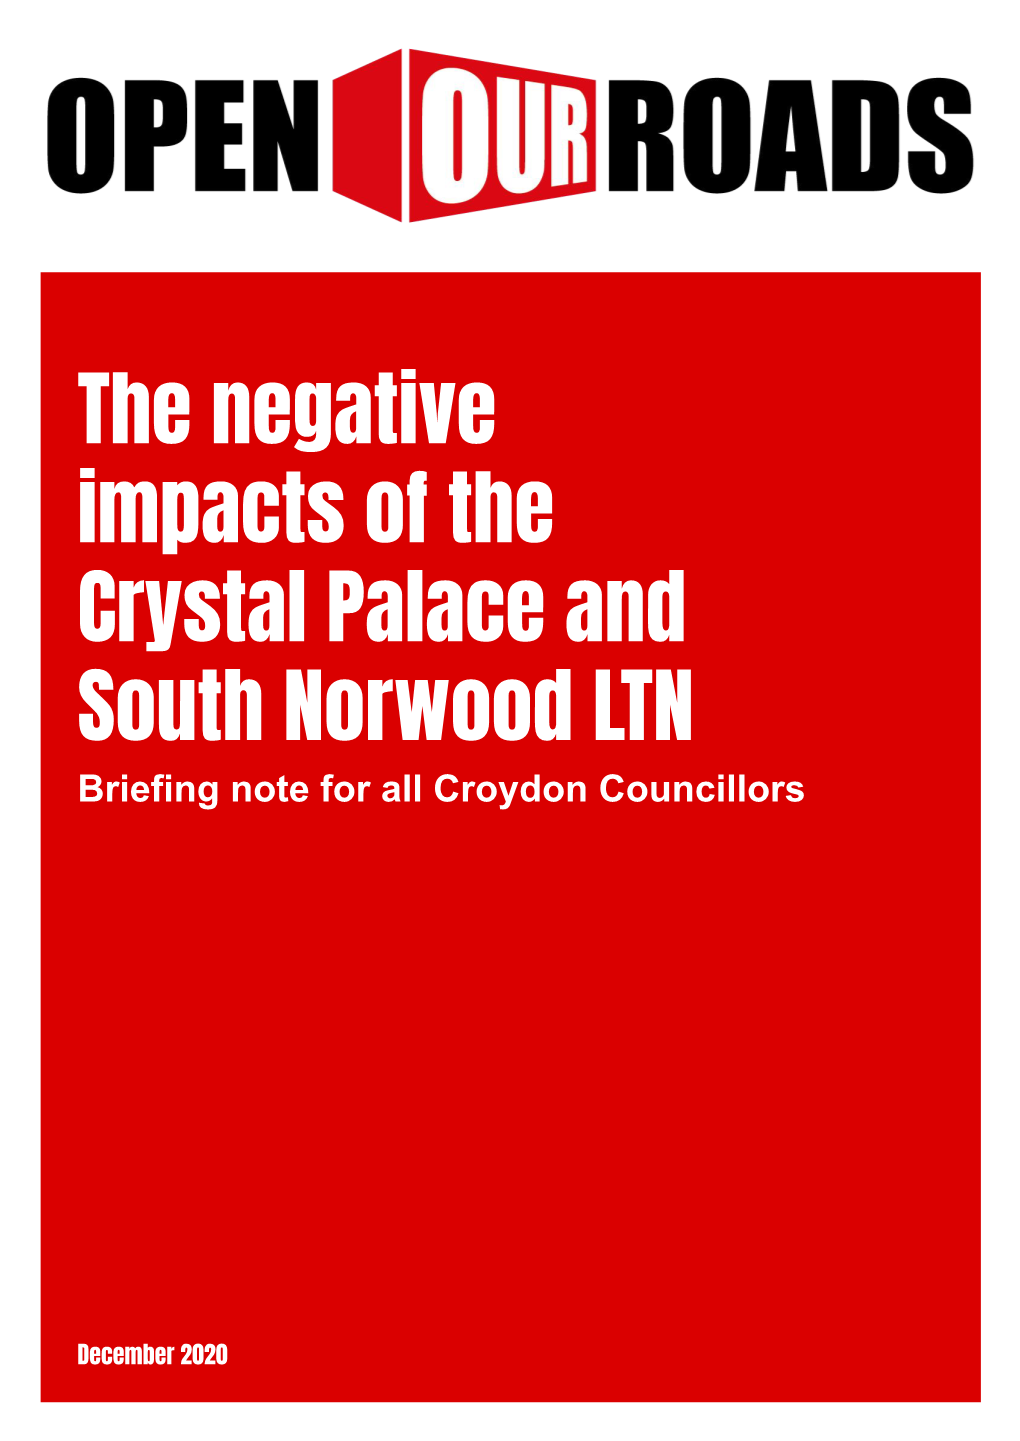 The Negative Impacts of the Crystal Palace and South Norwood LTN Briefing Note for All Croydon Councillors